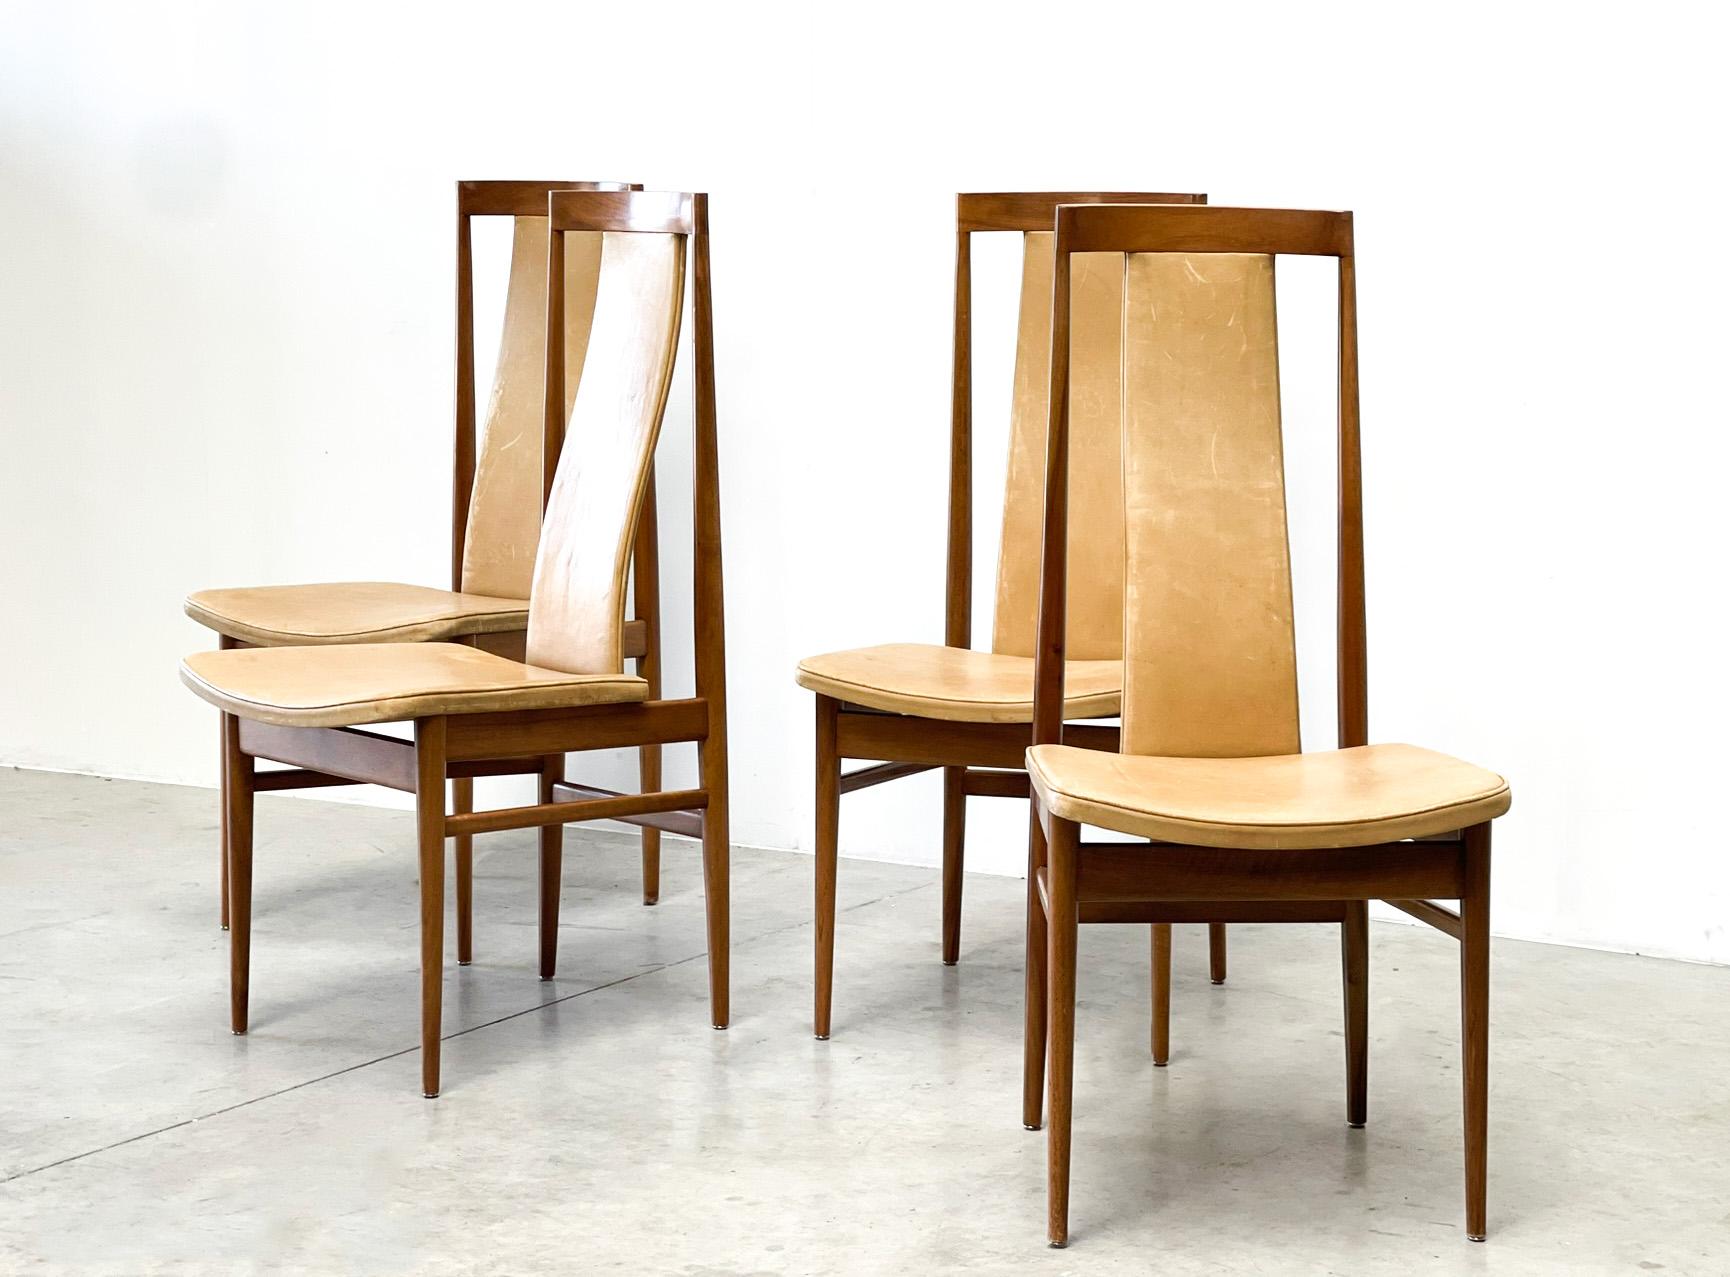 Gorgeous mid century dining chairs with a scandinavian inspired design.

Finely crafted frames with leather seats. 

Good condition with some nice patina. 

1960s - France

Dimensions:

Chairs:
Height: 107cm/42.12